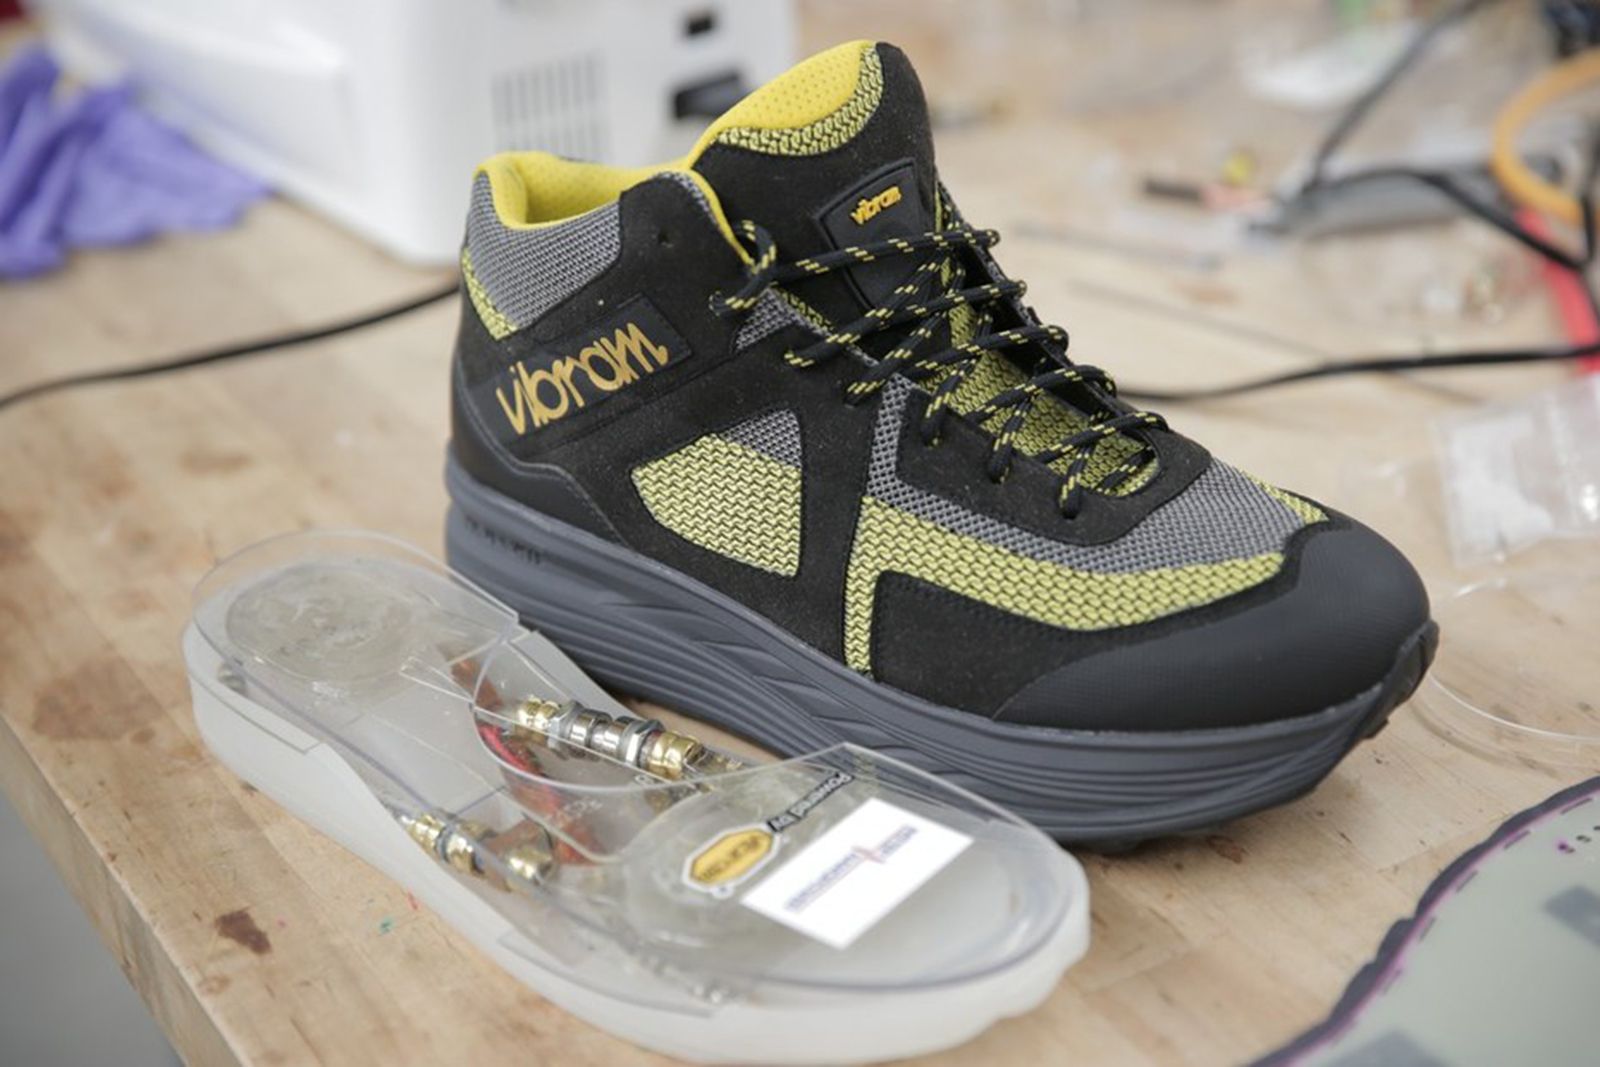 these kicks produce charge smartphone battery life may soon be a worry of the past image 1